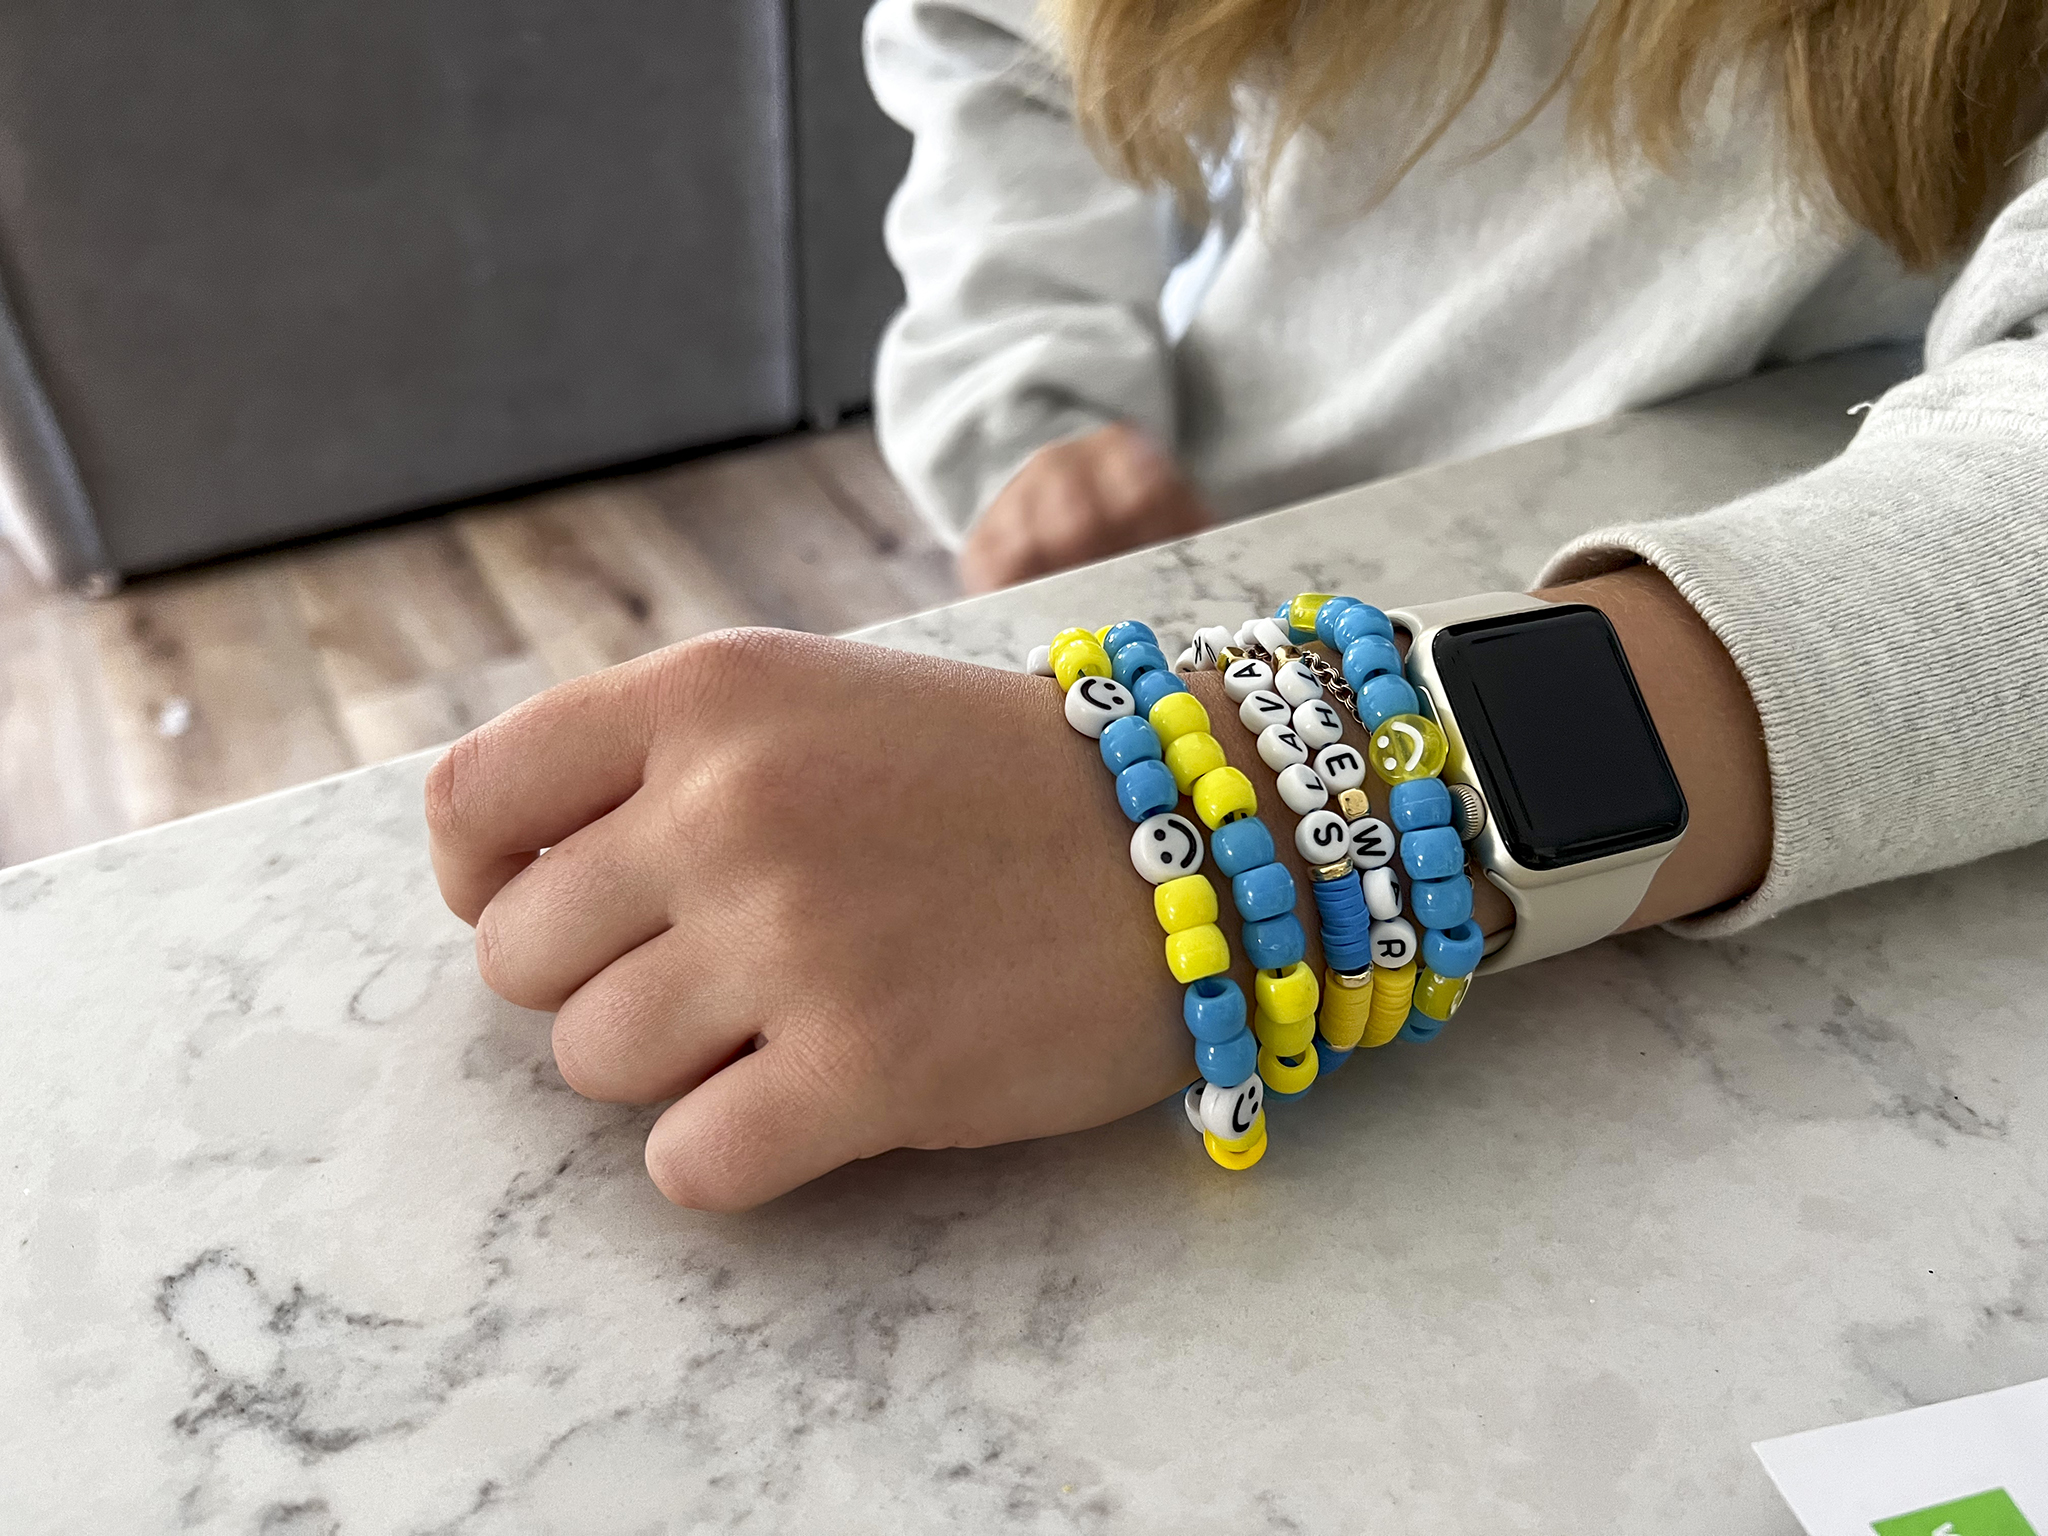 Liza’s forearm is laid flat on a granite countertop. She is wearing five bracelets with blue, yellow and white beads, an Apple Watch, and a gray sweatshirt.